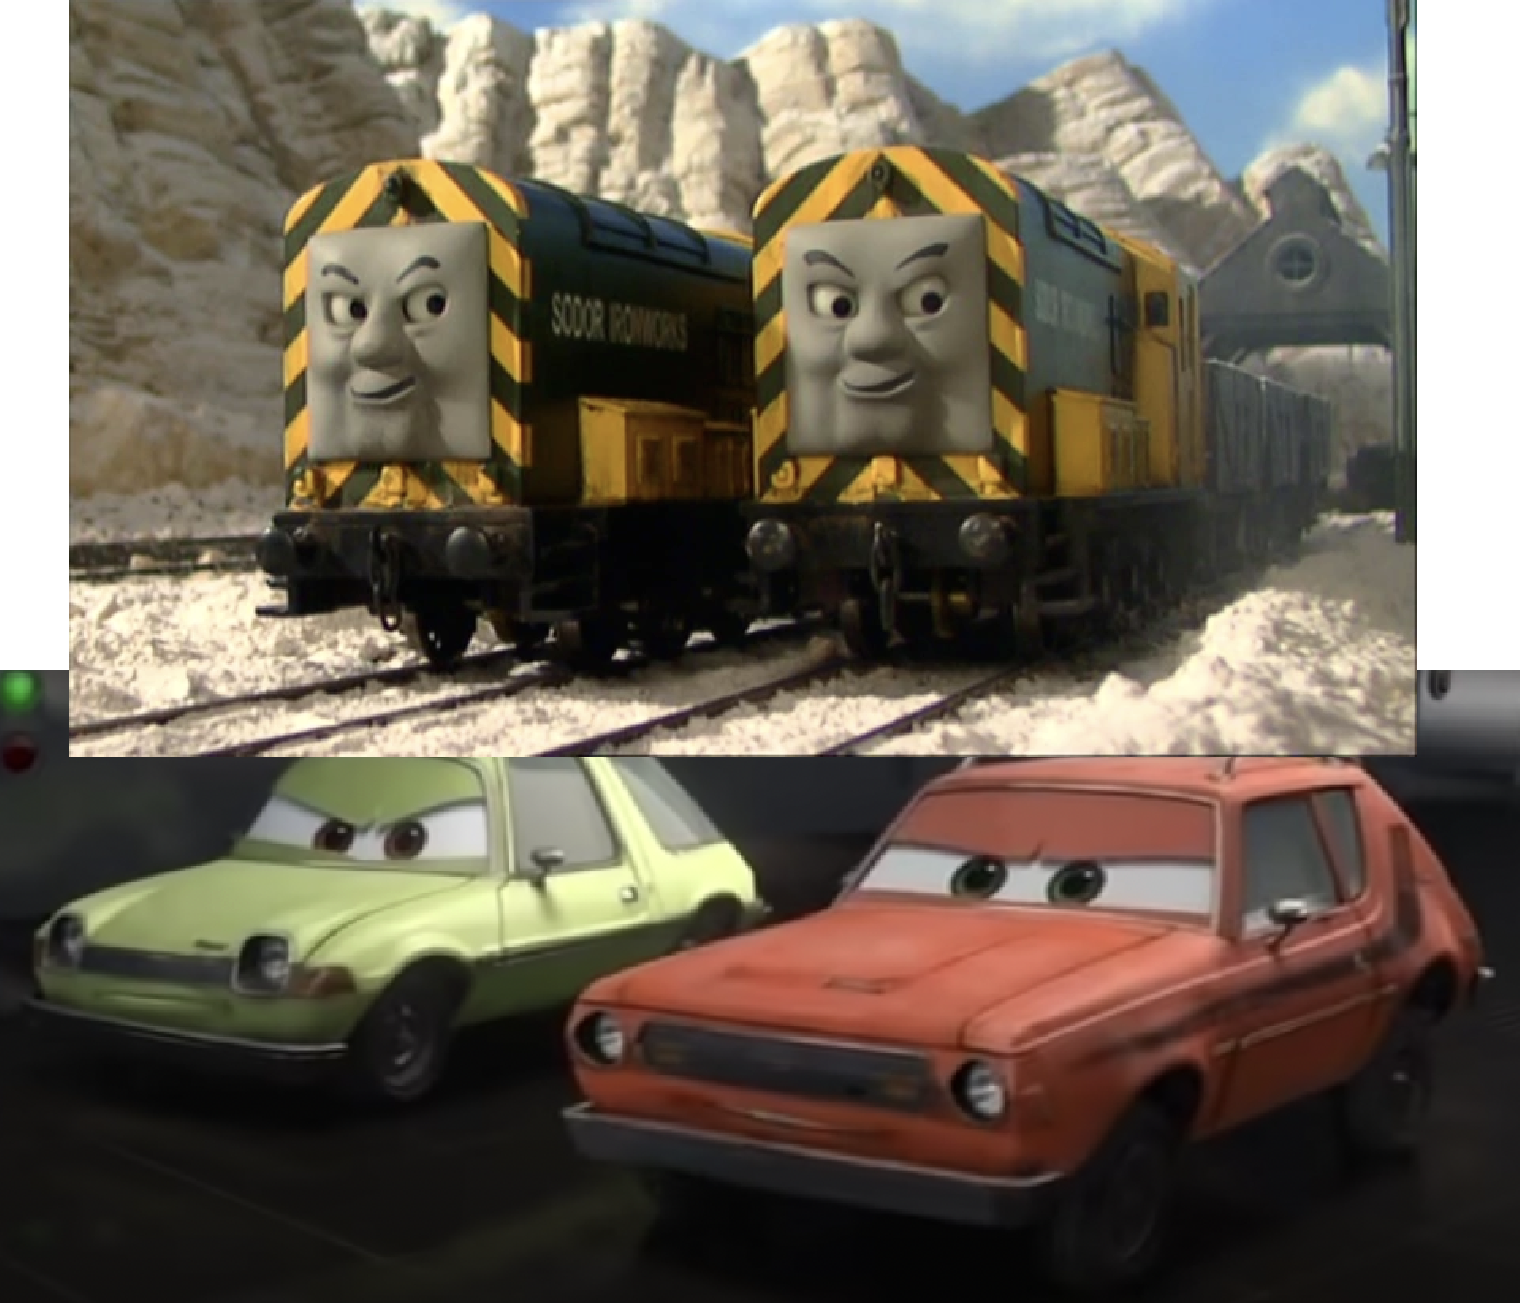 Meet Two More Cars 2 Characters - Grem & Acer - HeyUGuys